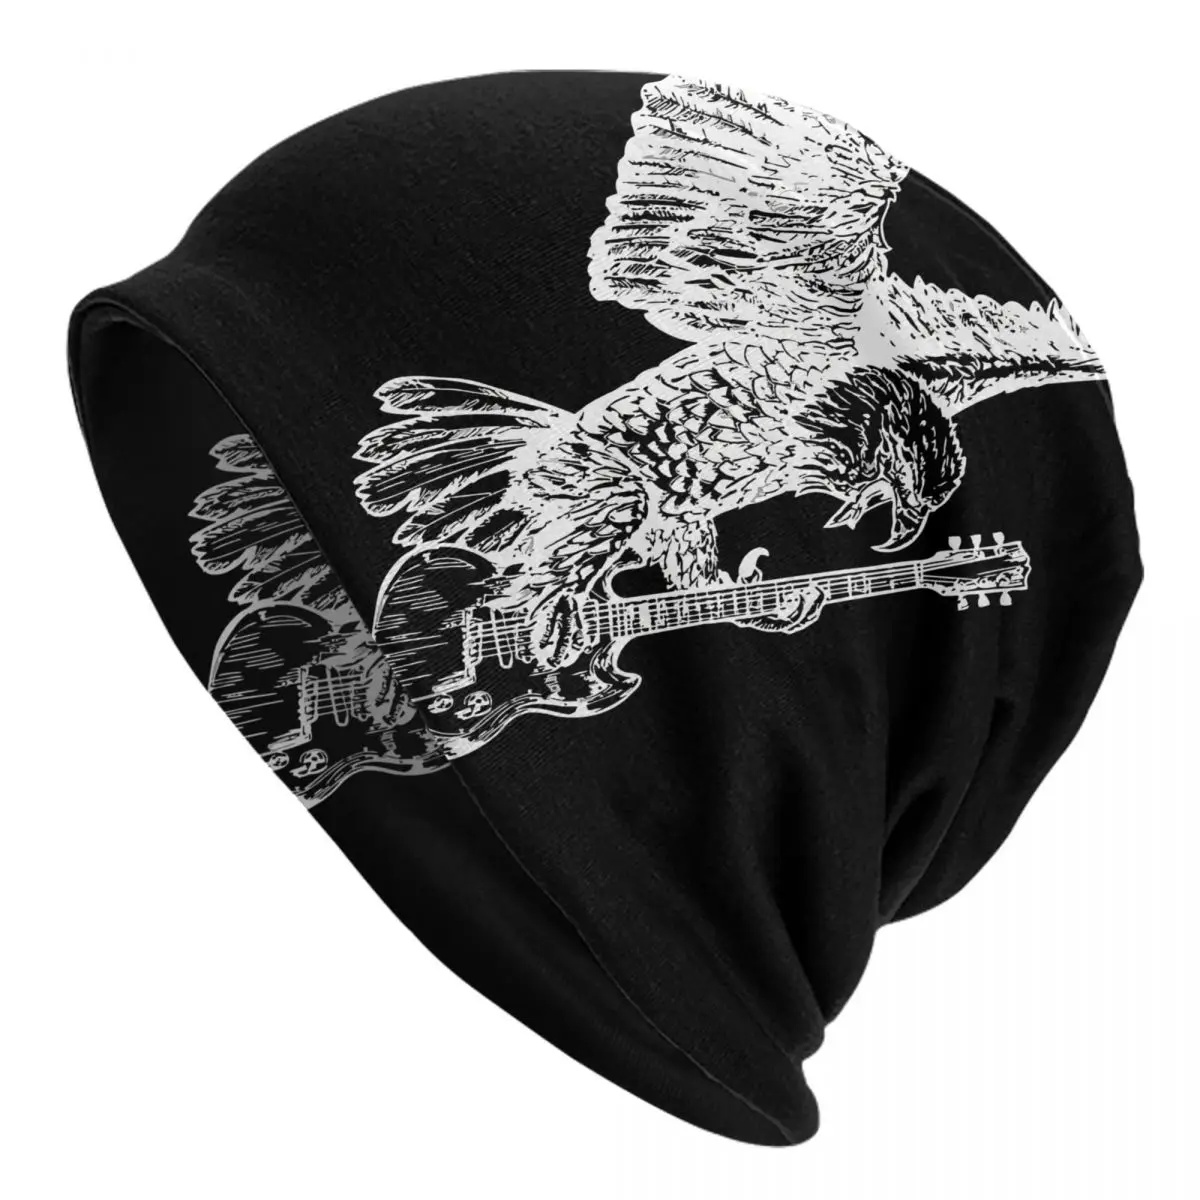 Seembo Eagle Playing Guitar Guitarist Musician Music Band Adult Men's Women's Knit Hat Keep warm winter Funny knitted hat